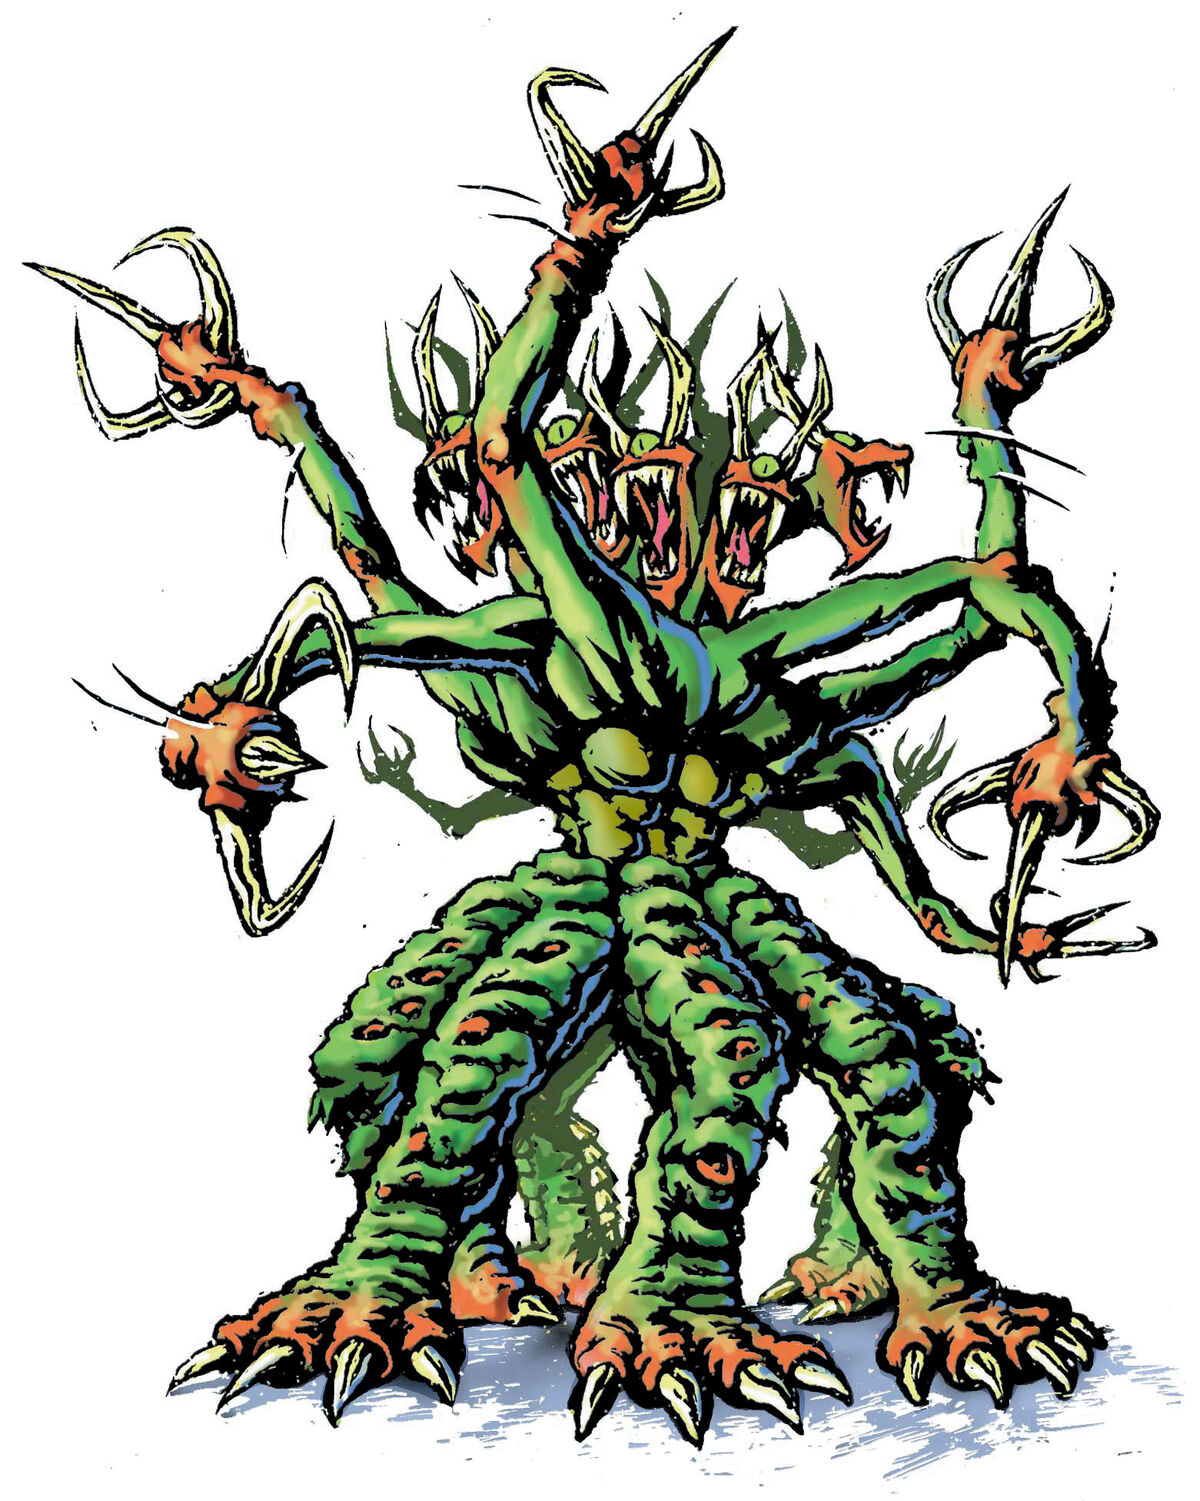 Unnamed Creature with Eight Heads and Eight Legs | Seerowpedia 